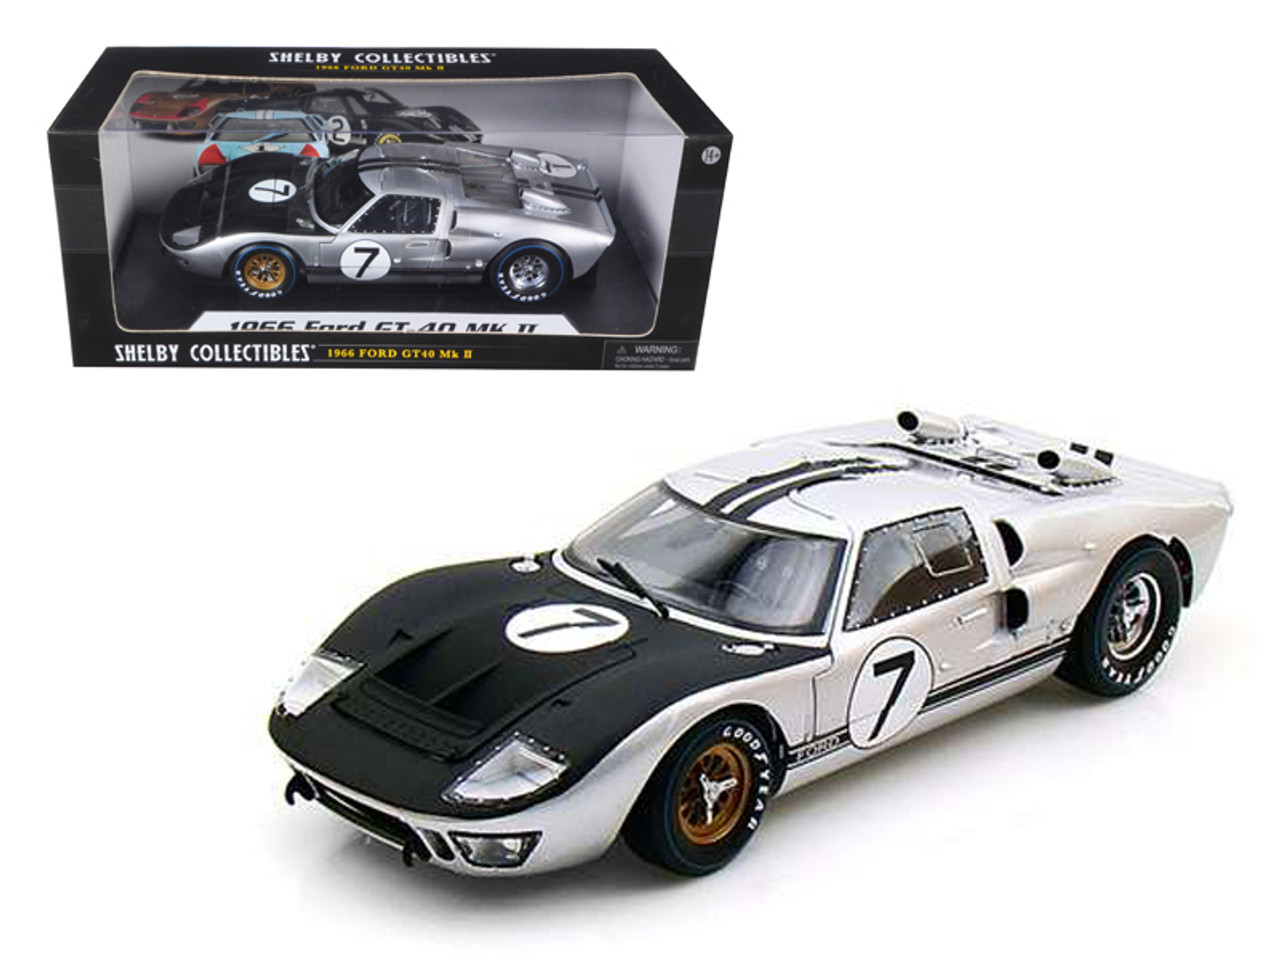 1/18 DreamPower Ford GT40 MK1 black/yellow 